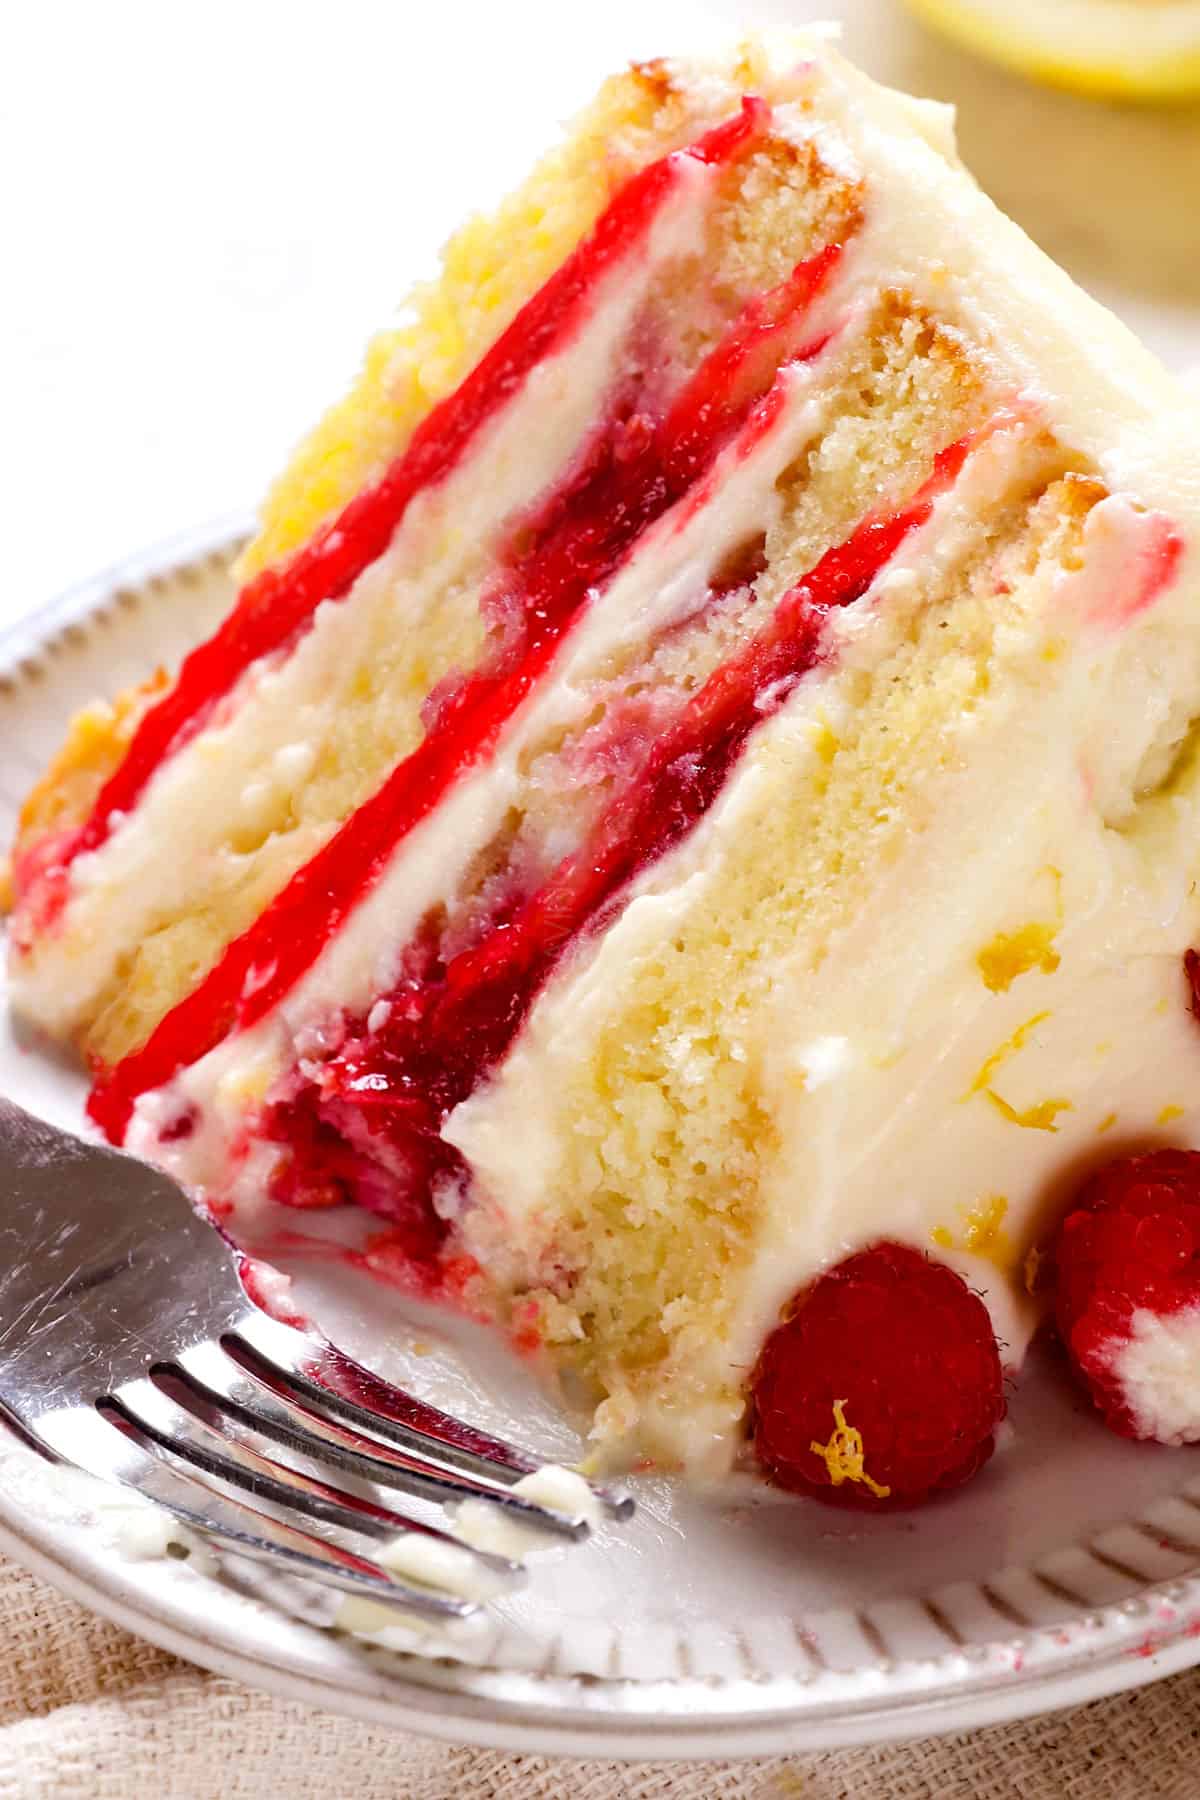 up close of a bite of of Raspberry Lemon Cake showing the raspberry filling and tender cake